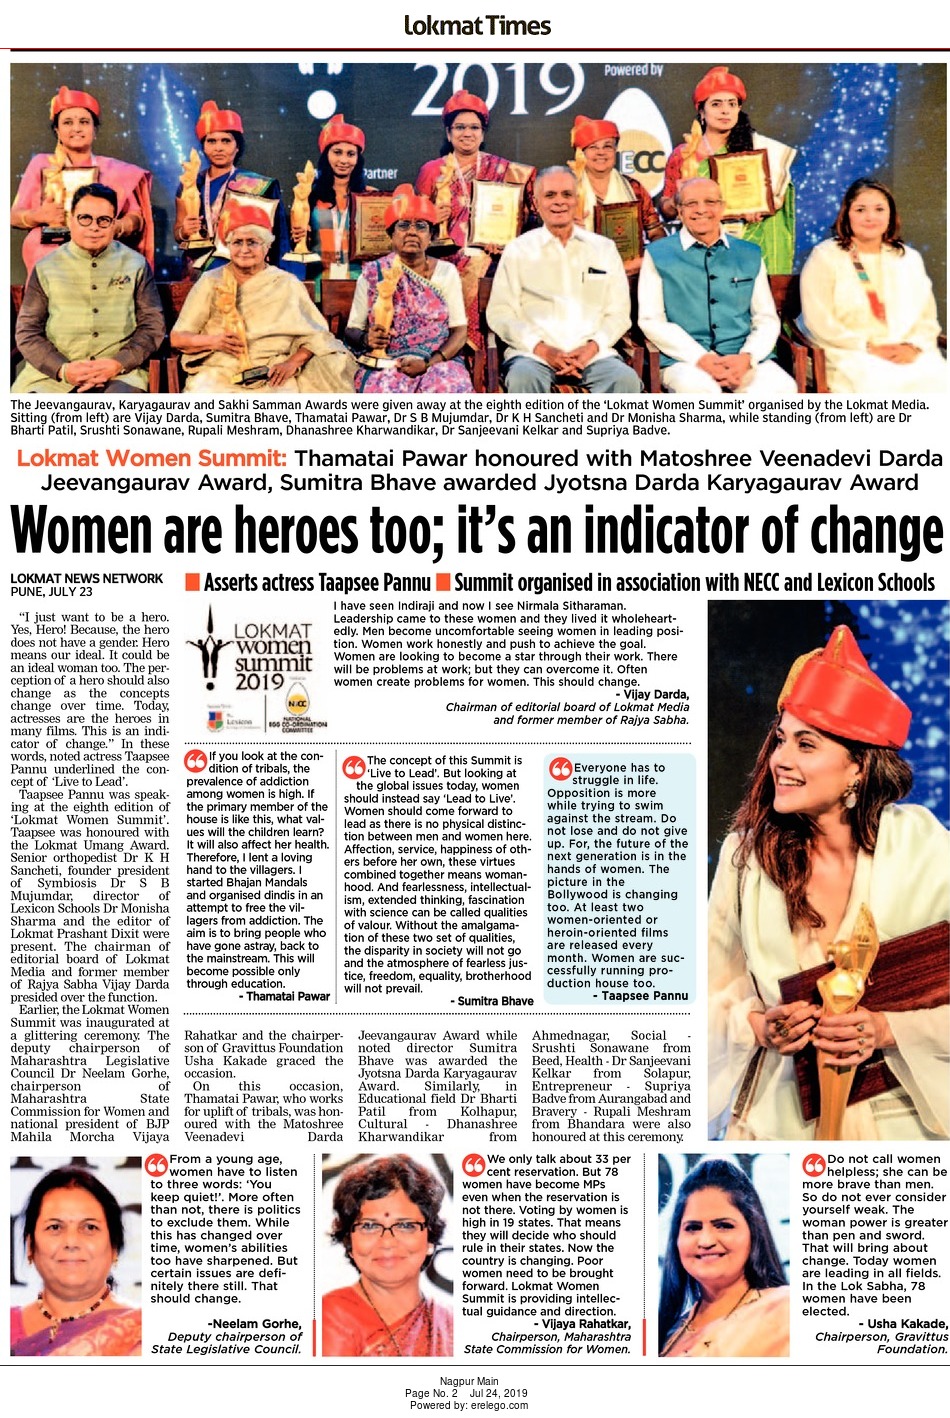 Womens are heroes too; it’s an indicator of change